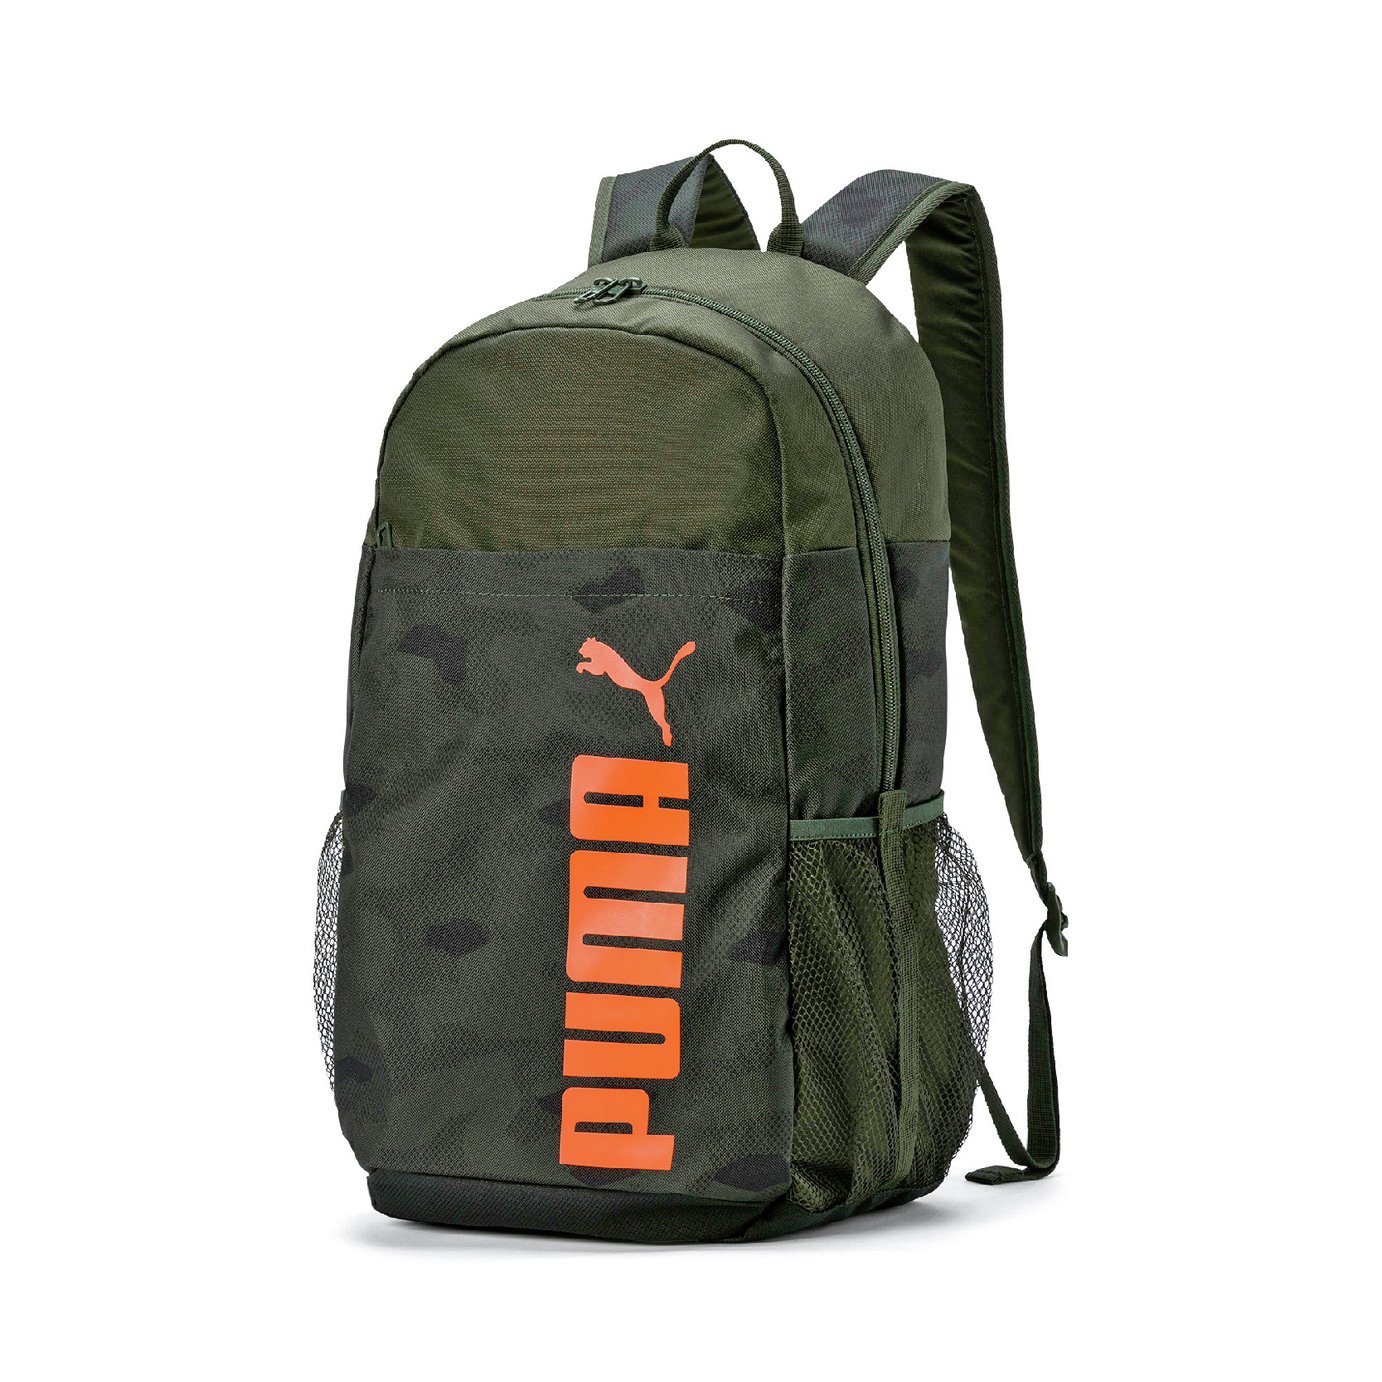 Puma Style 24L Backpack Review